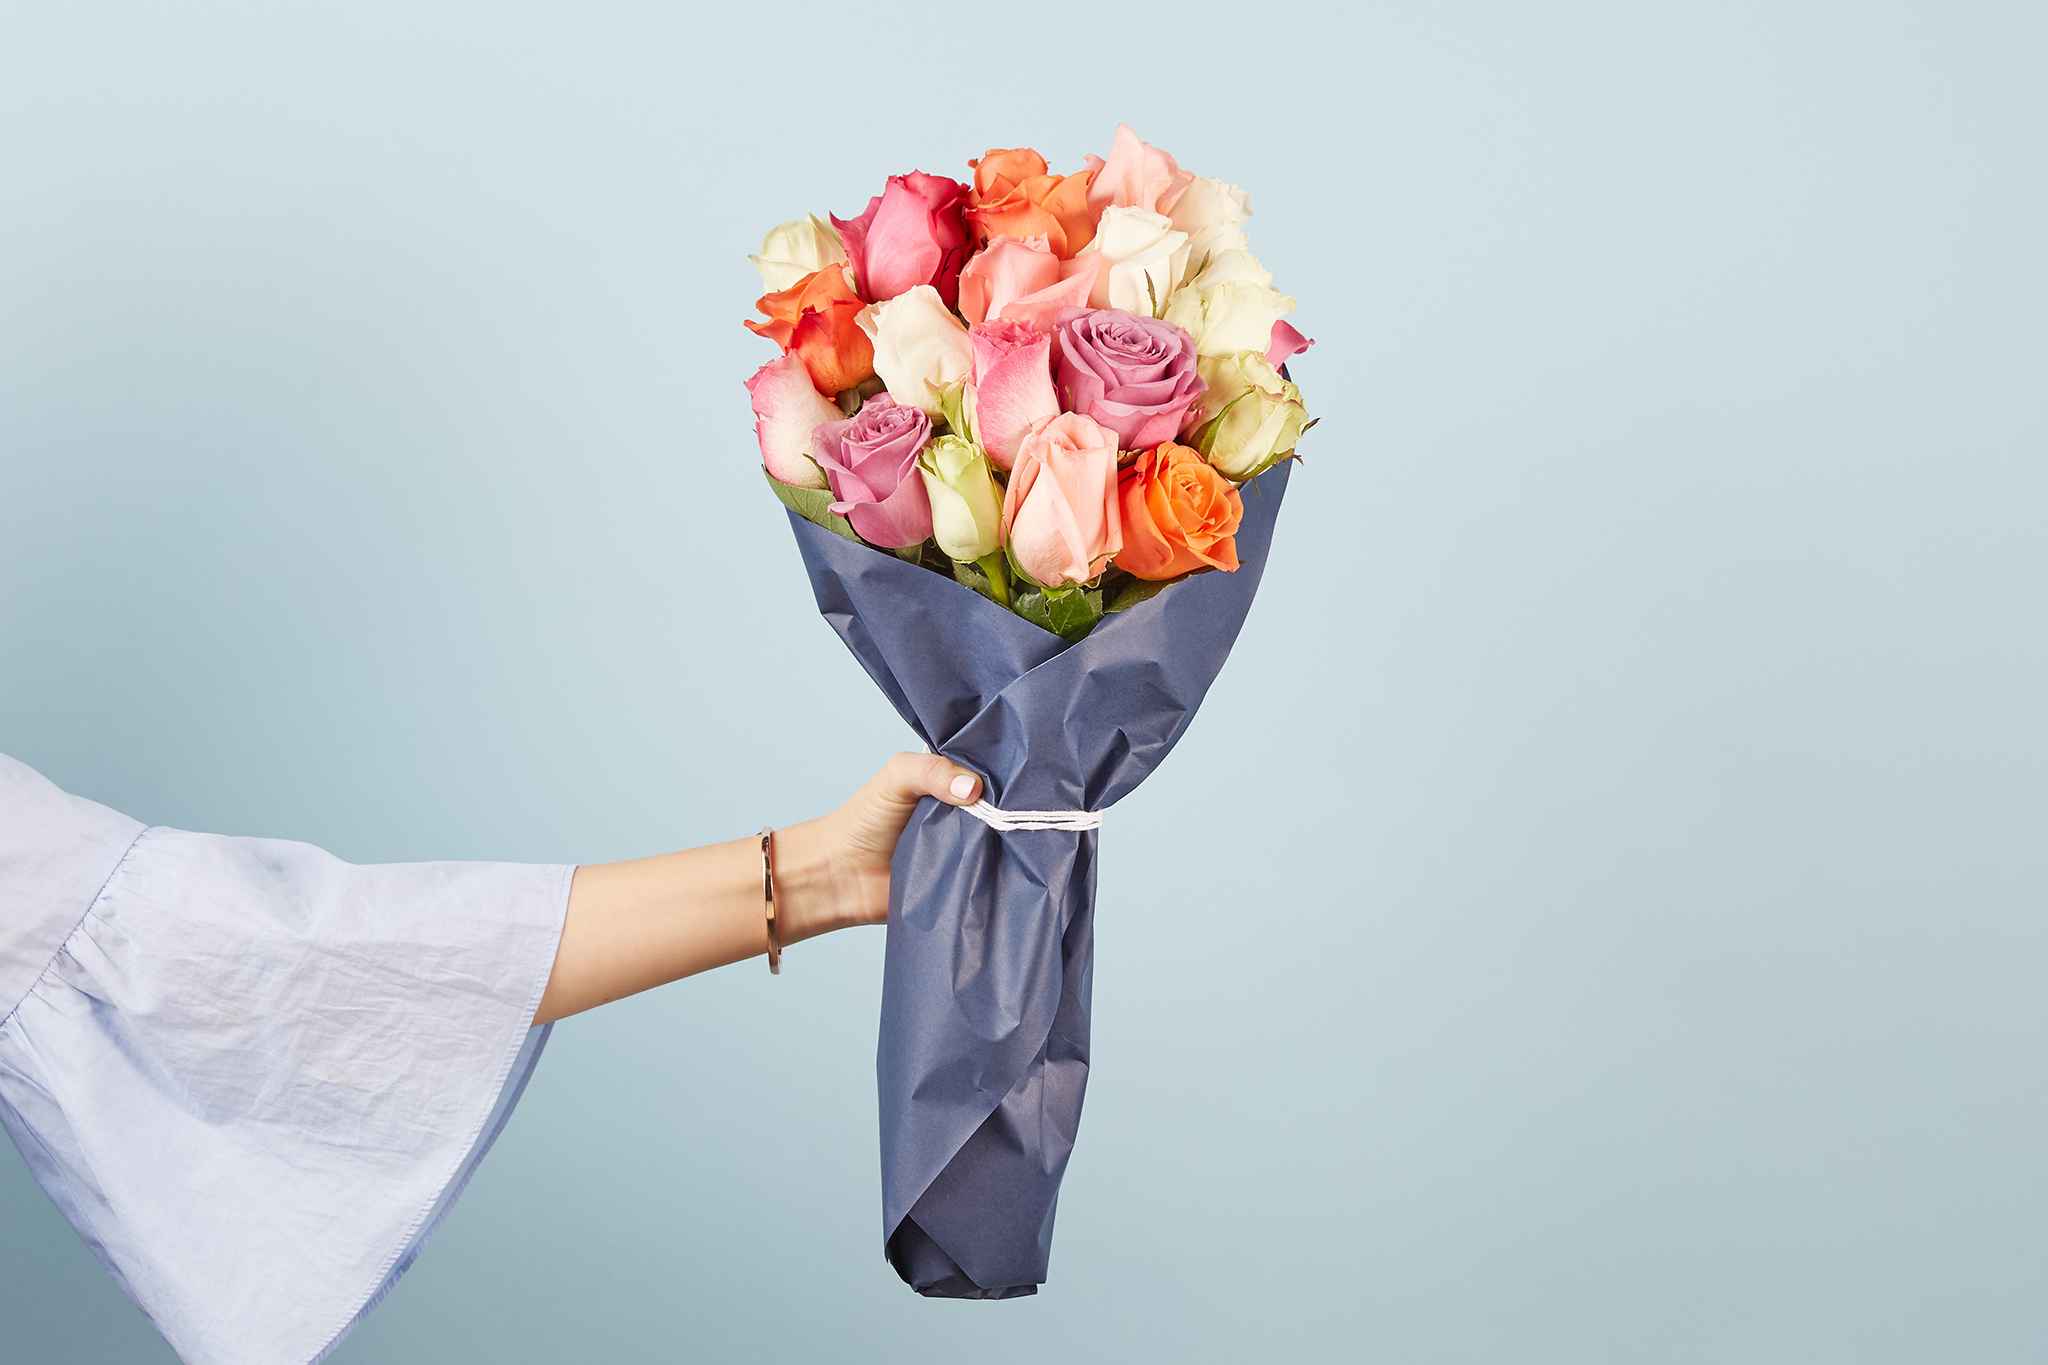 The Flower Company For Buying Flowers Online